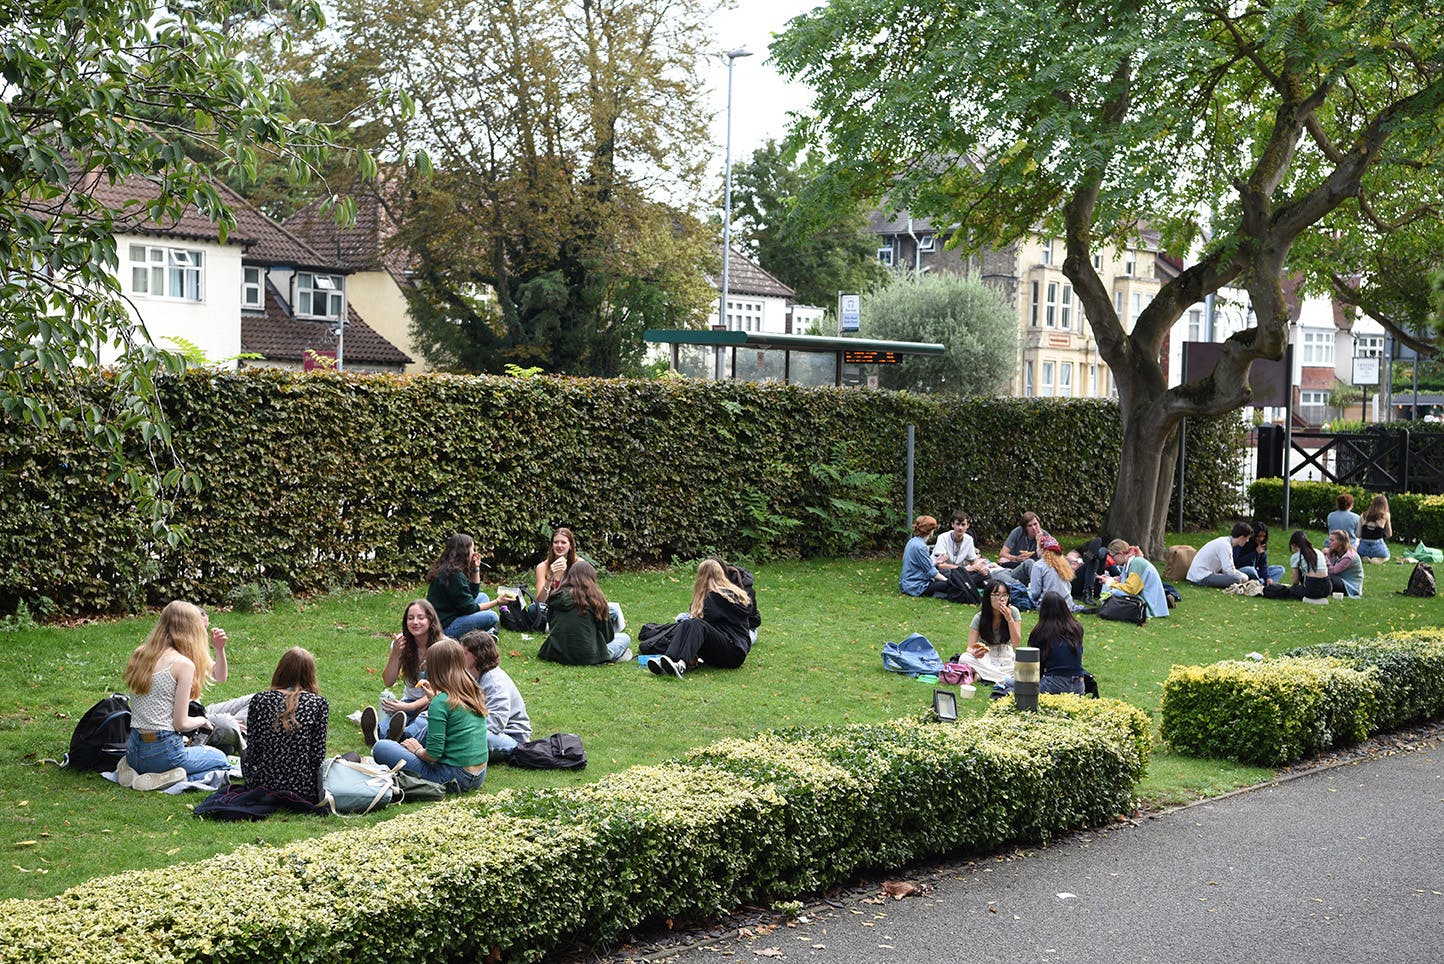 Groups of students relaxing on the grass